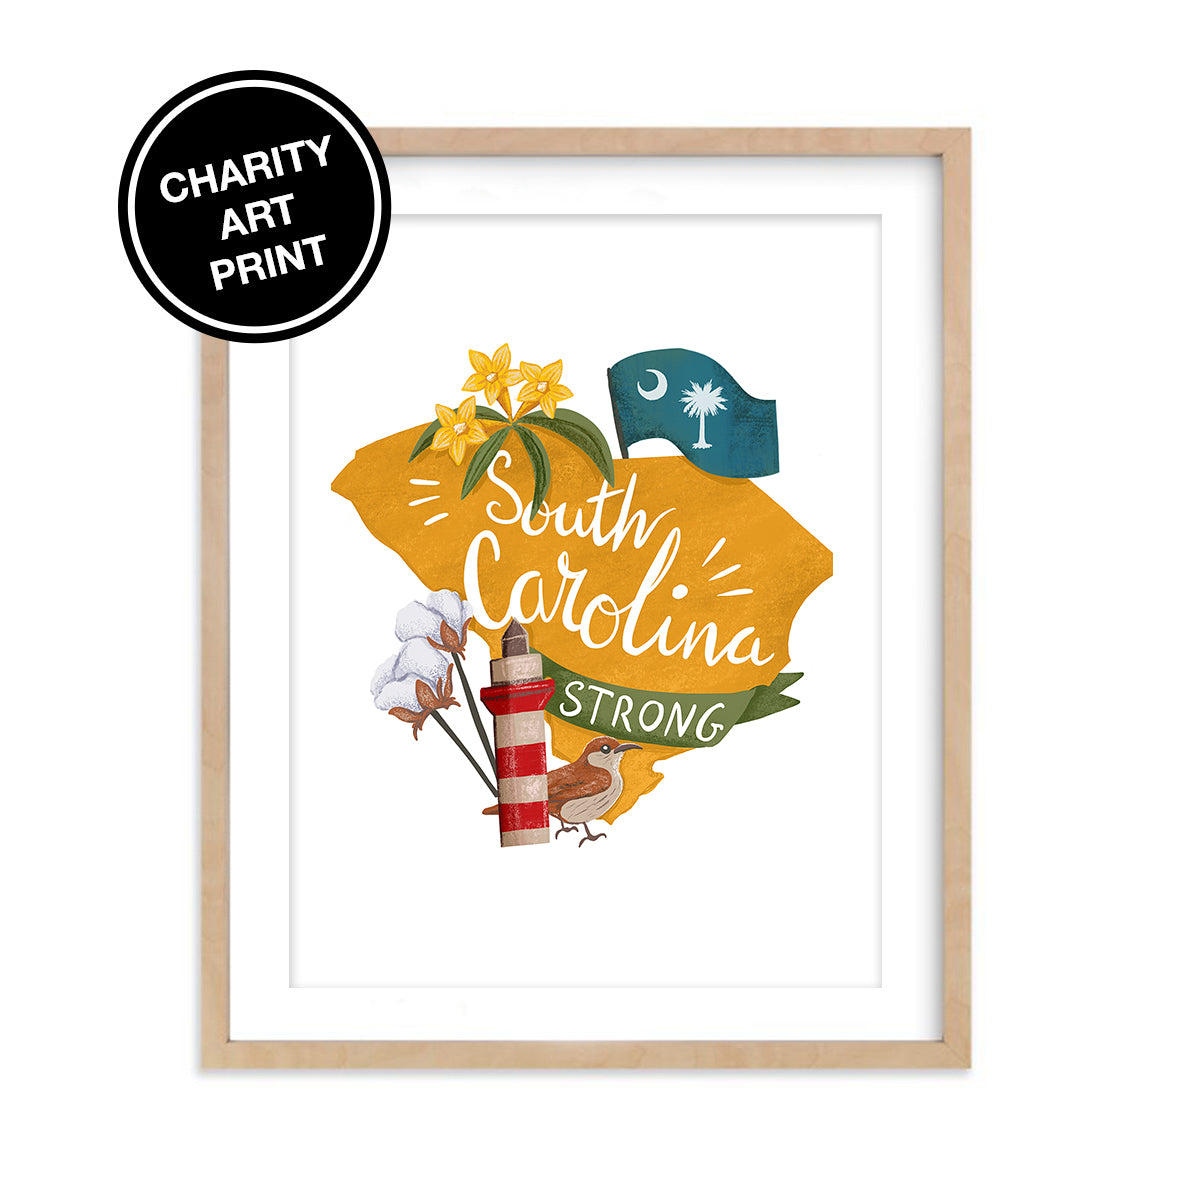 Hurricane Florence Relief - Charity Art Prints